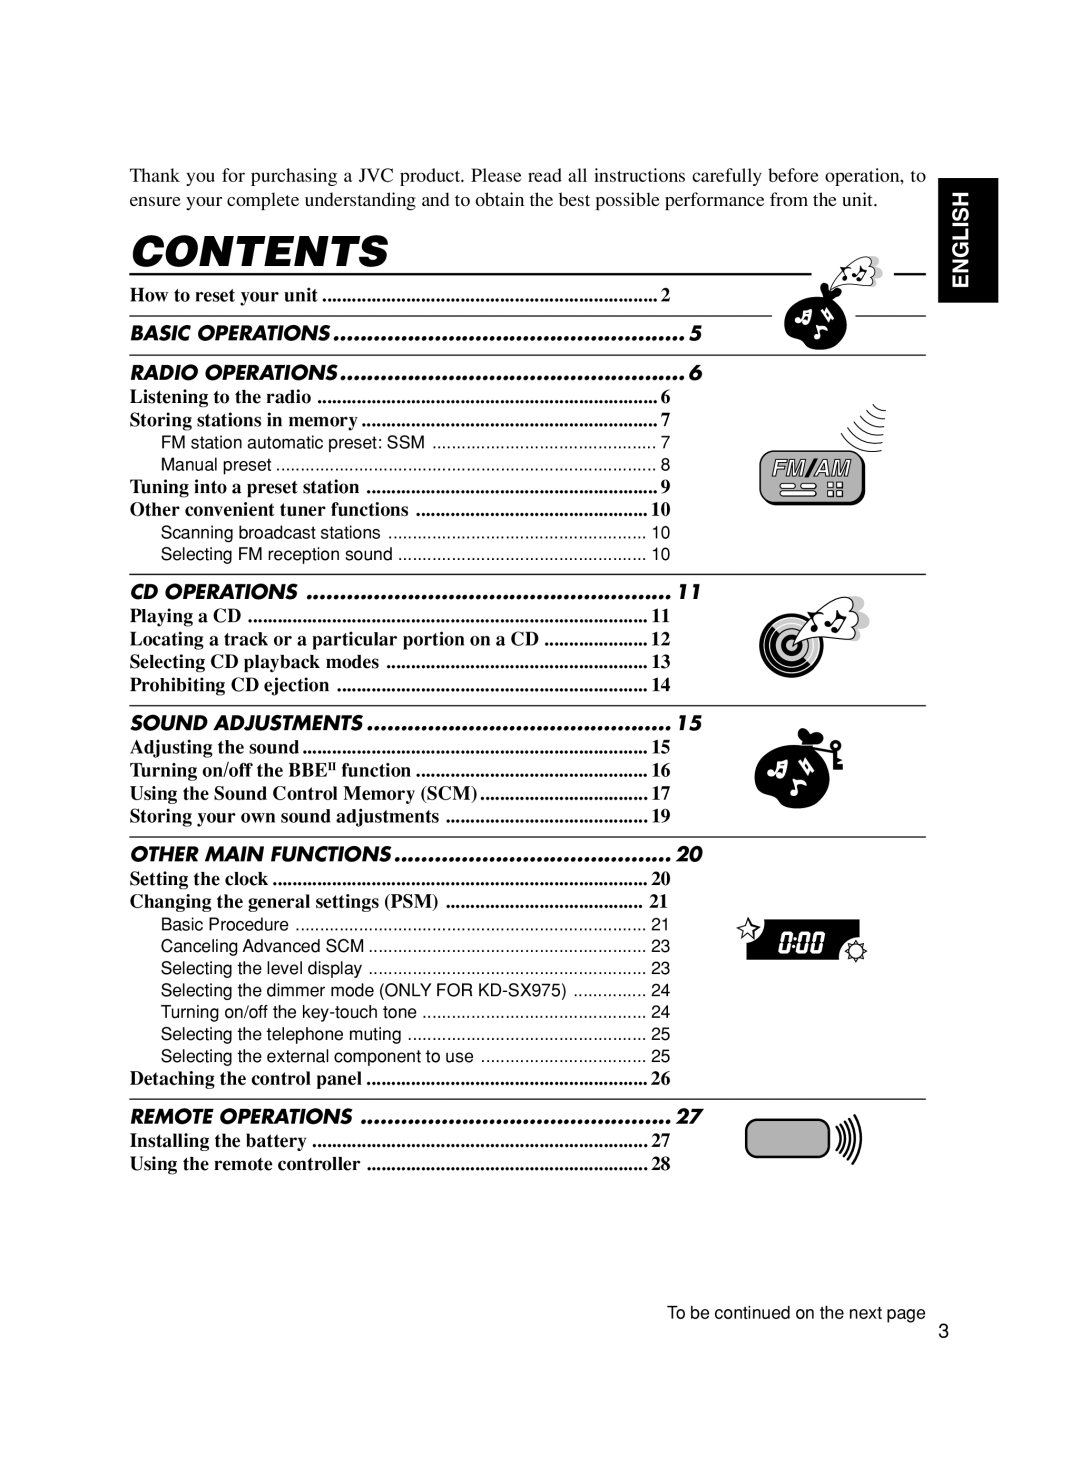 JVC KD-SX875, KD-SX975 manual Contents, English, Locating a track or a particular portion on a CD 